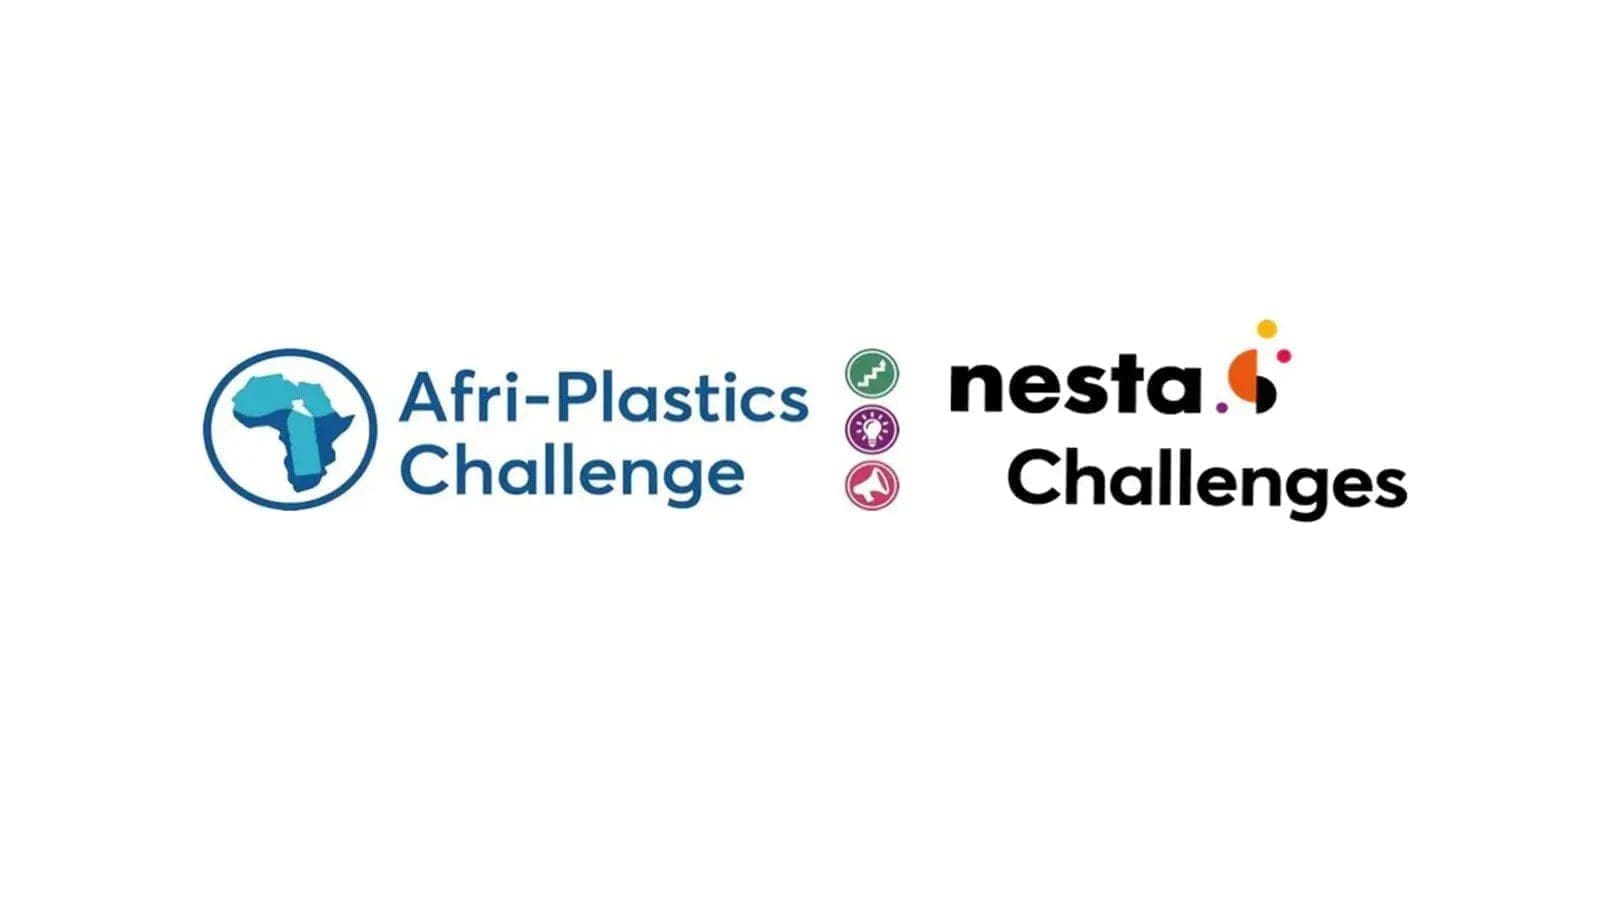 Nesta Challenges Afri-Plastics campaign reaches final stage, calls for innovative solutions to tackle plastic pollution